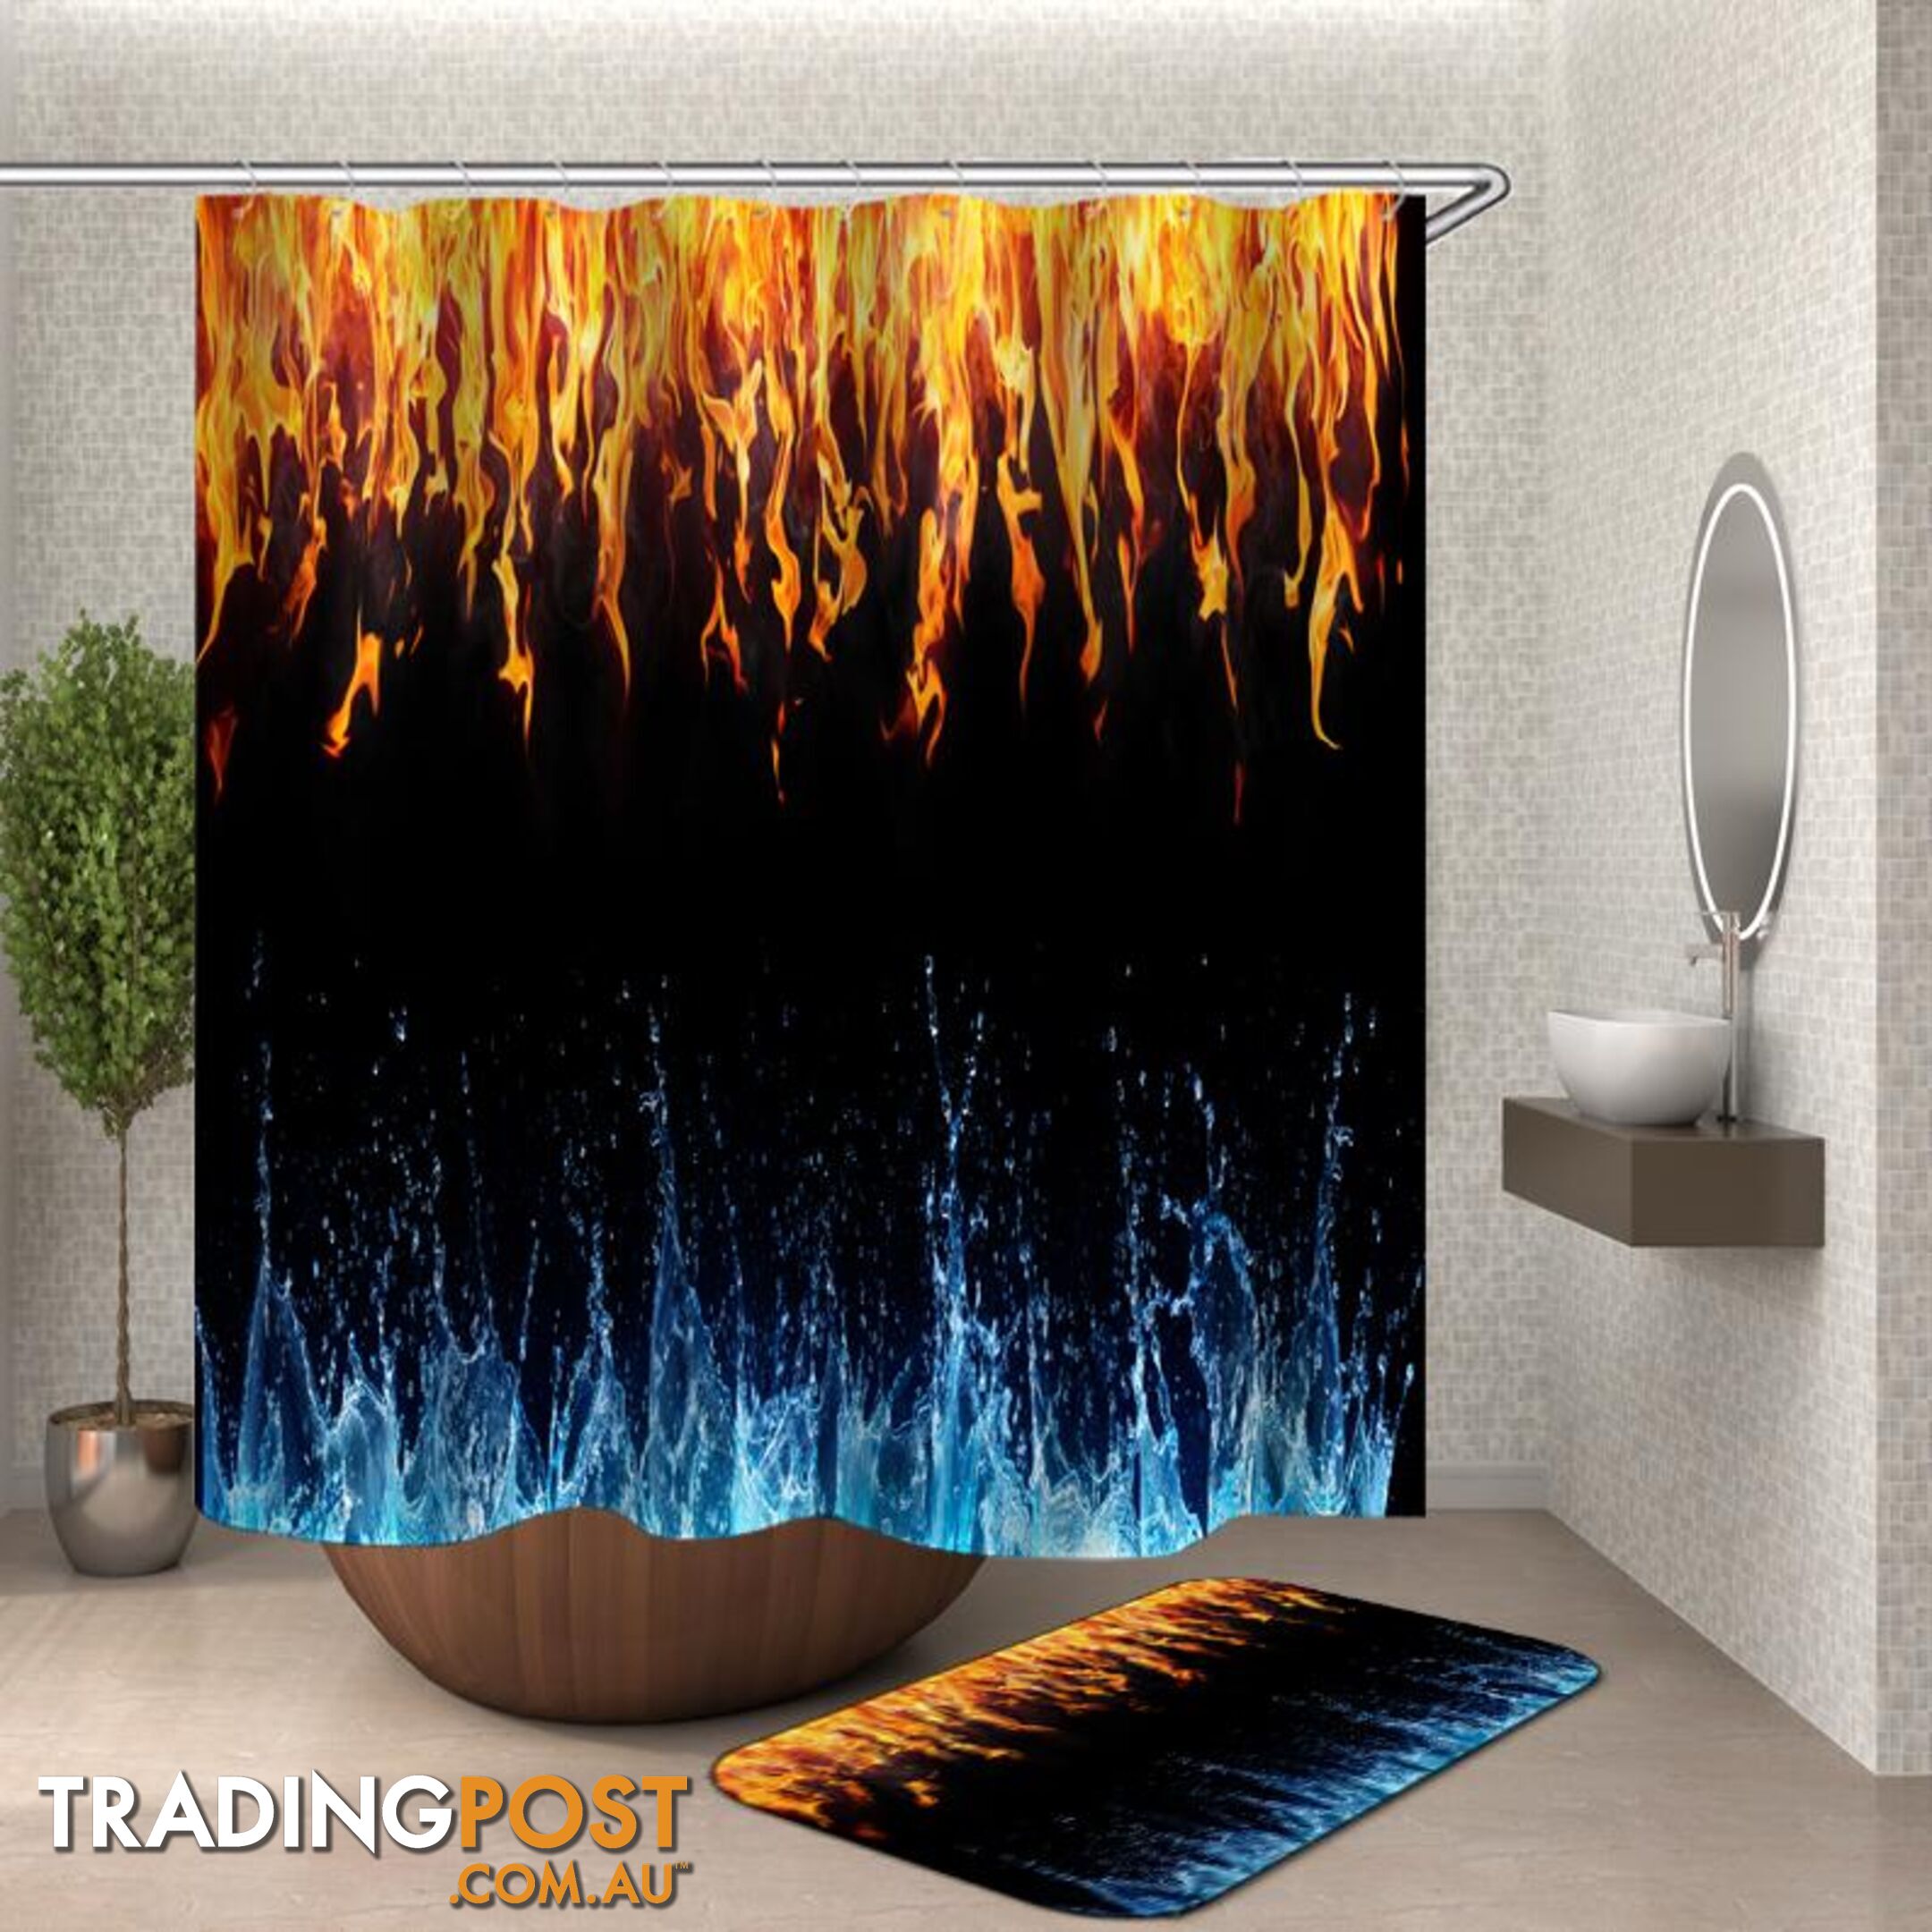 Water VS Fire Shower Curtain - Curtain - 7427046120302